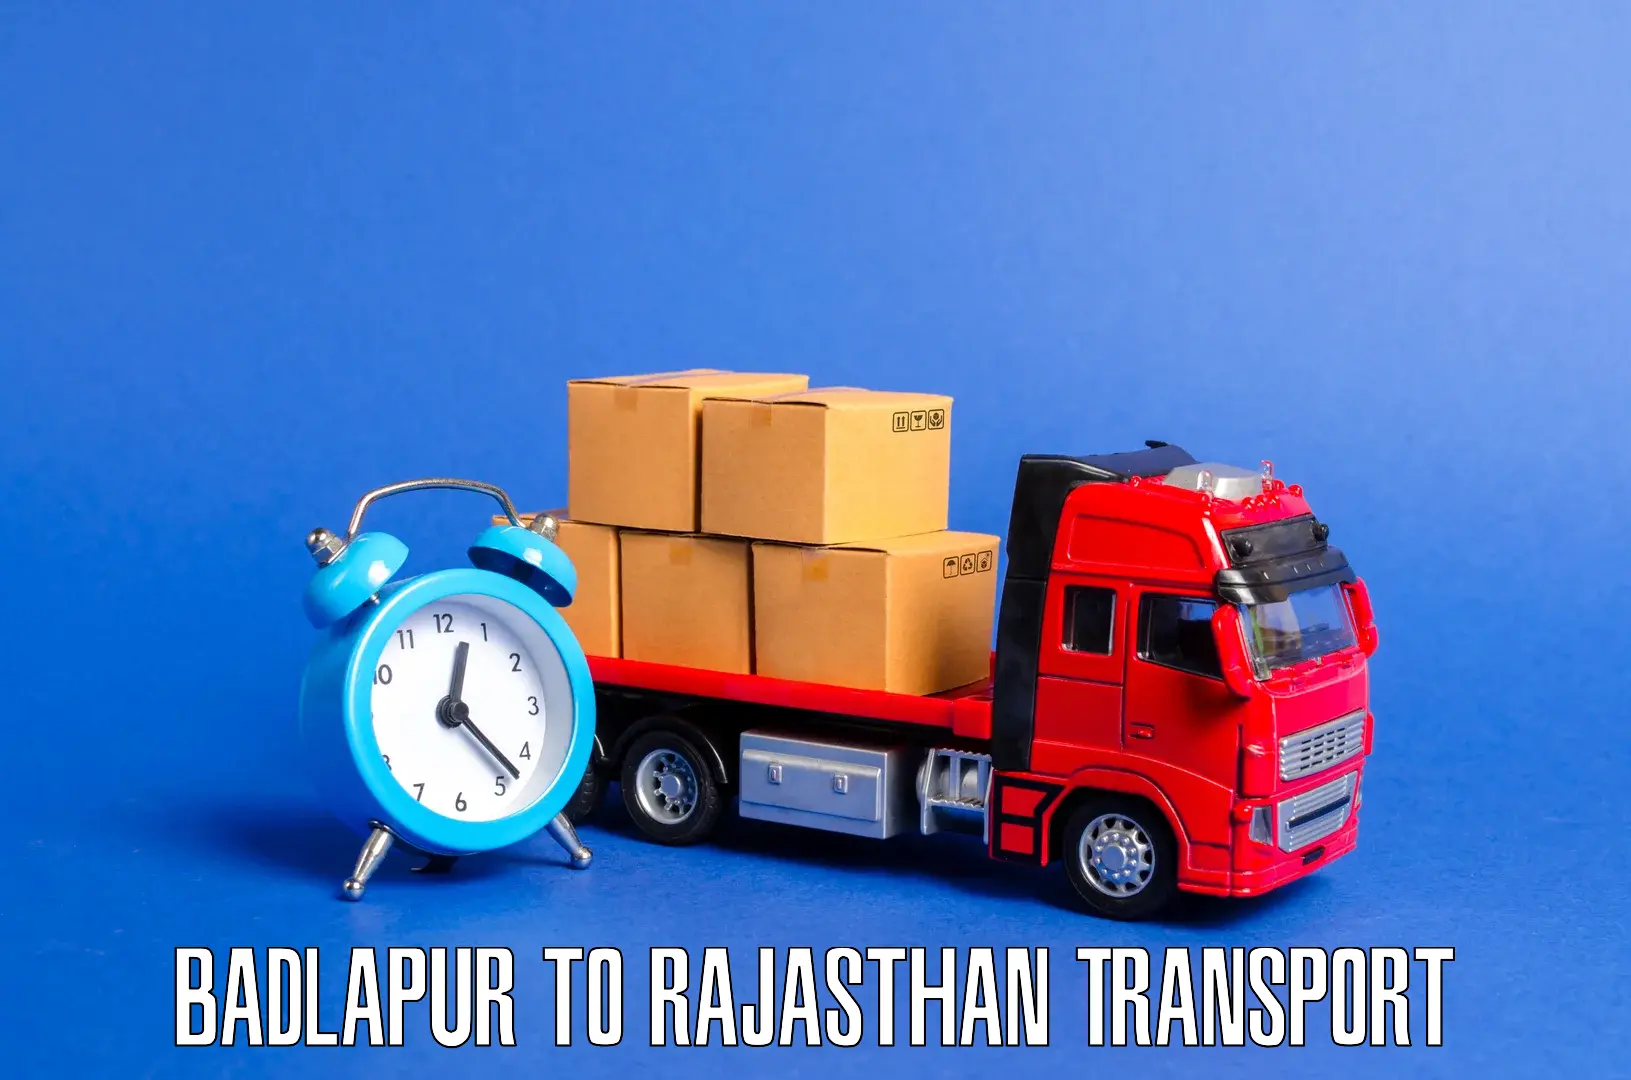 Truck transport companies in India Badlapur to Rajasthan